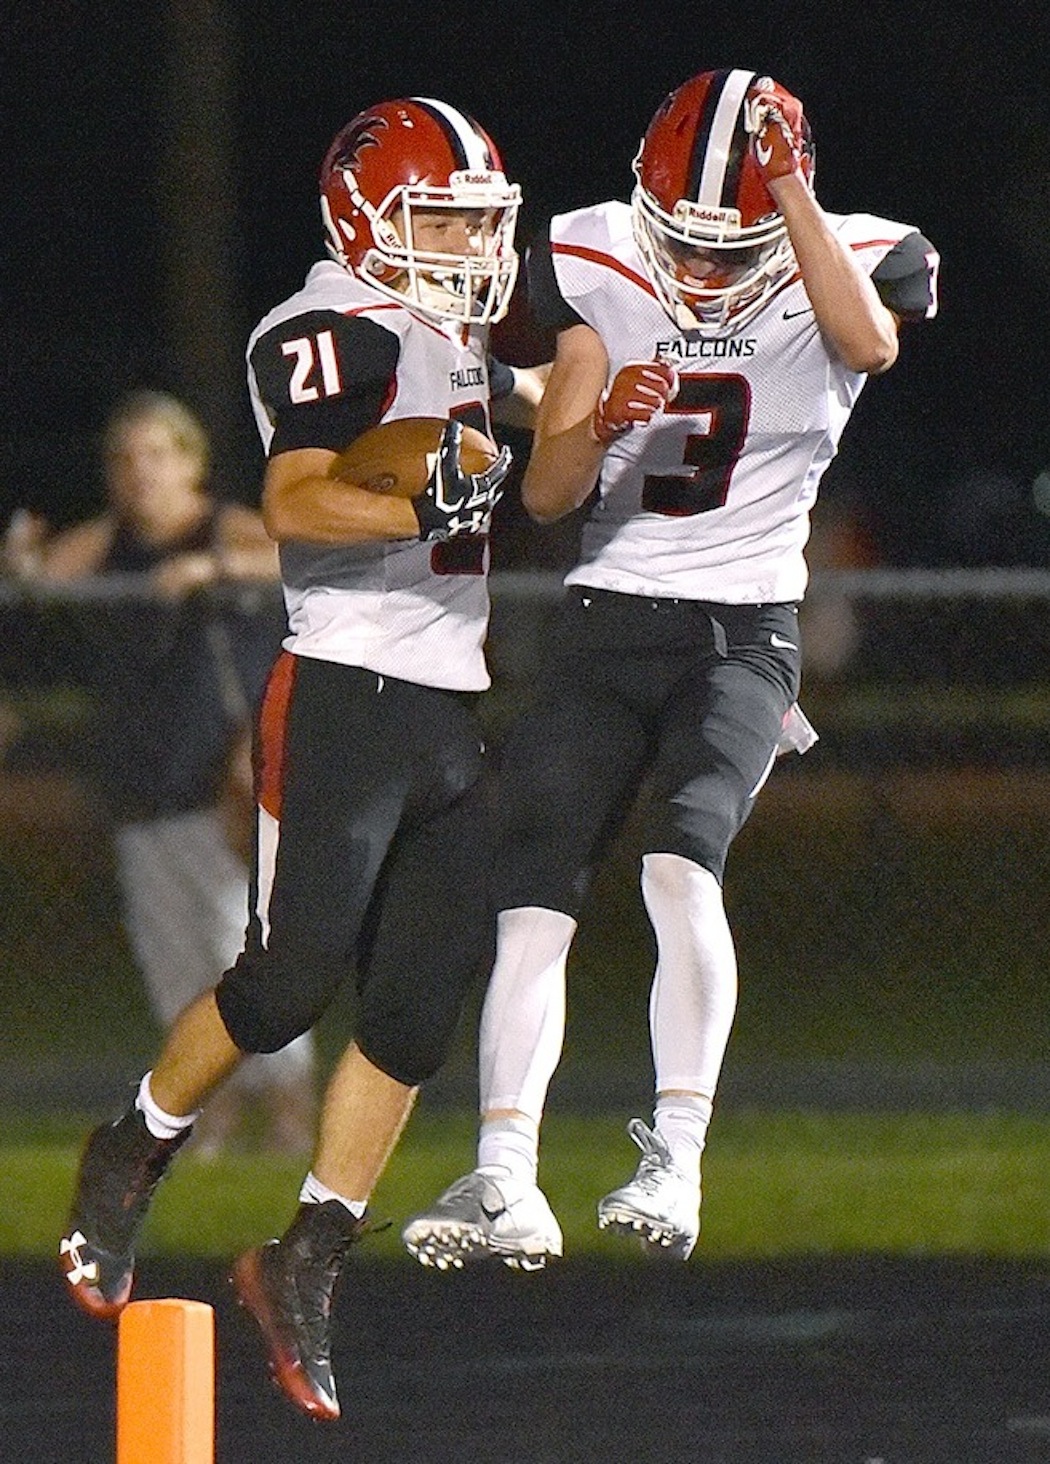 Nick Stott and Tommy Peltier celebrate a touchdown during the Falcons' 35-12 victory over Hamburg last Thursday. (Photo by James Hibbard)